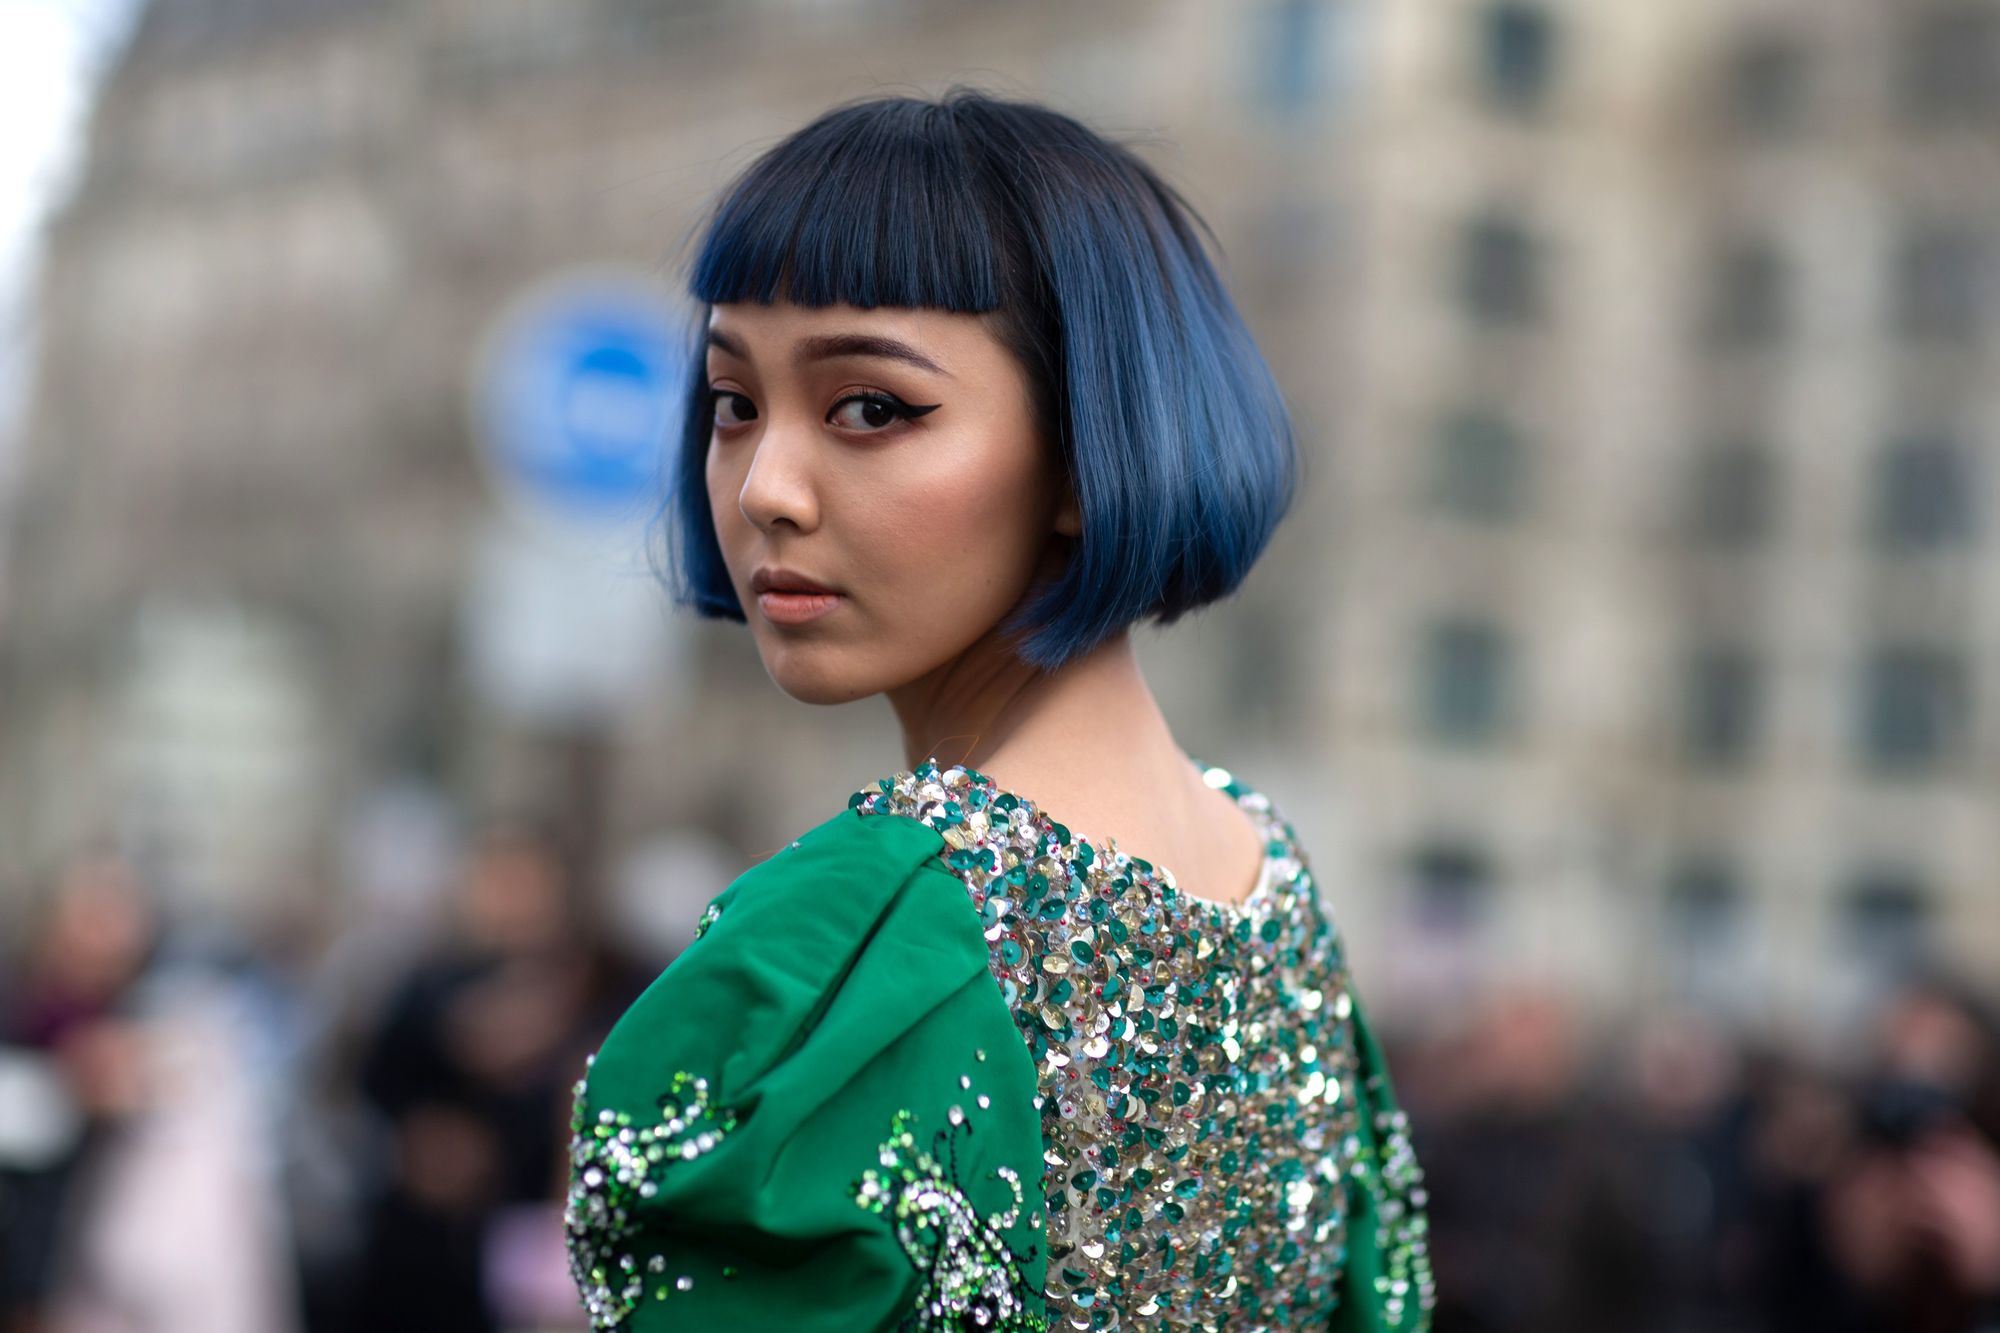 Woman with short hair, bangs and blue color oriental features looks back towards the camera.